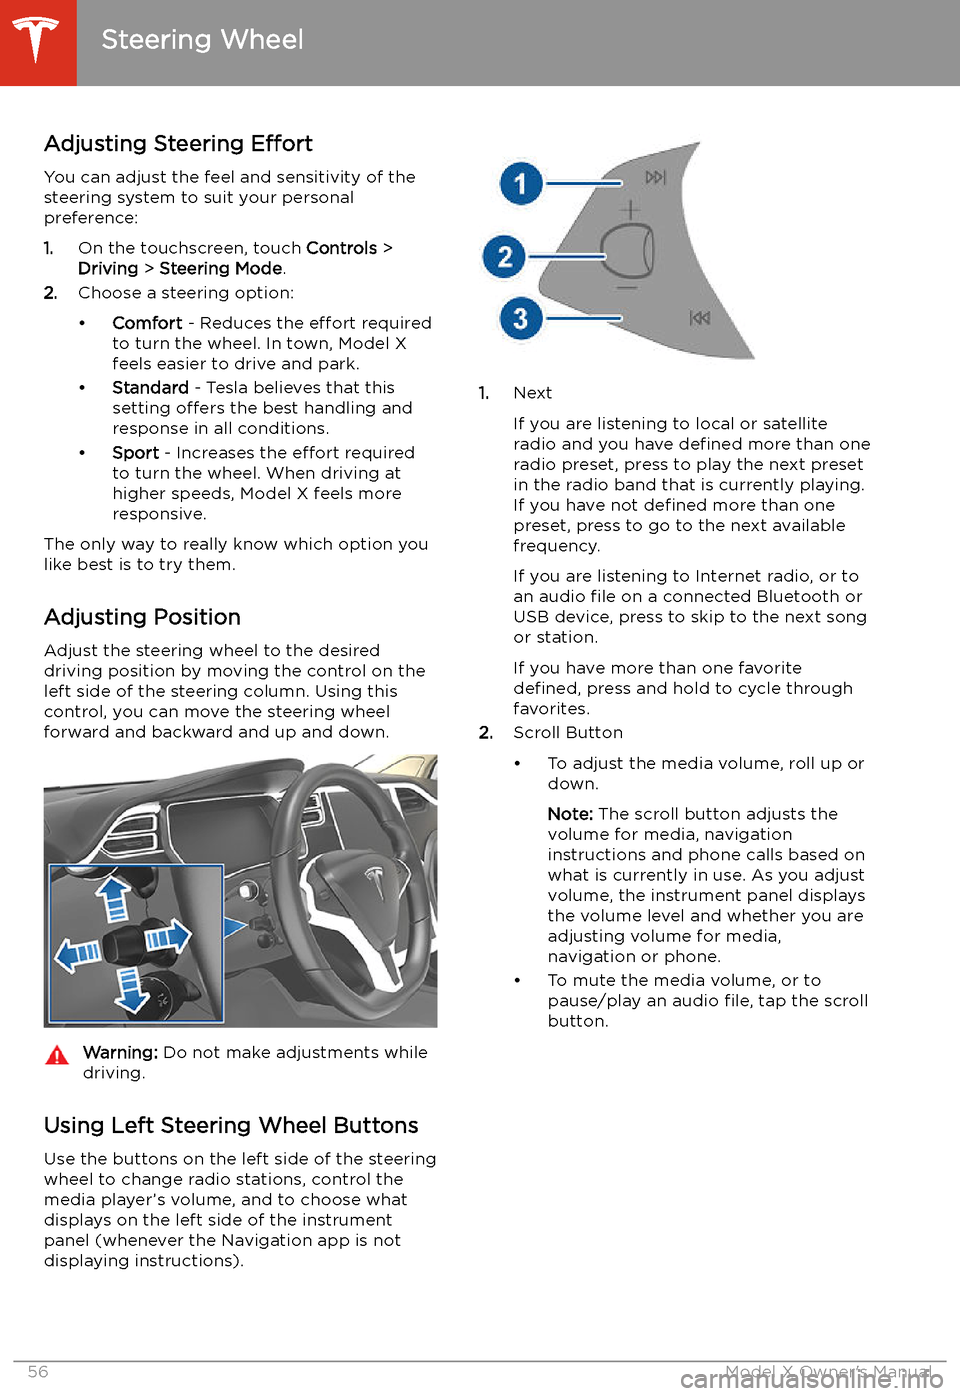 TESLA MODEL X 2020  Owners Manual Steering Wheel
Adjusting Steering  Effort
You can adjust the feel and sensitivity of the
steering system to suit your personal preference:
1. On the touchscreen, touch  Controls >
Driving  > Steering 